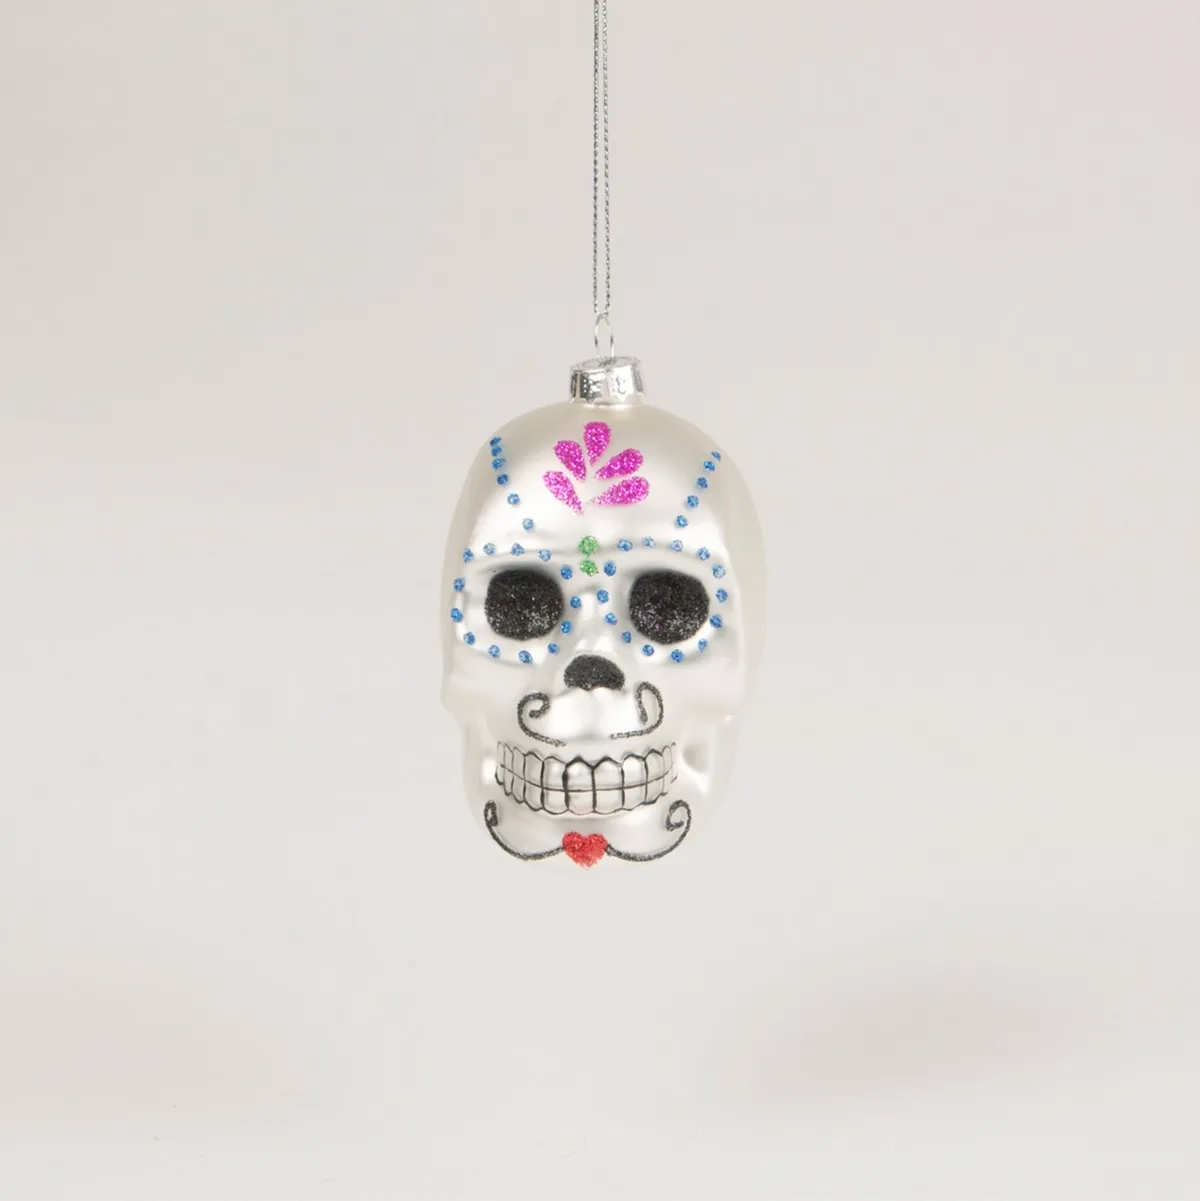 A glittery bauble shaped like a traditional Day of the Dead sugar skull.